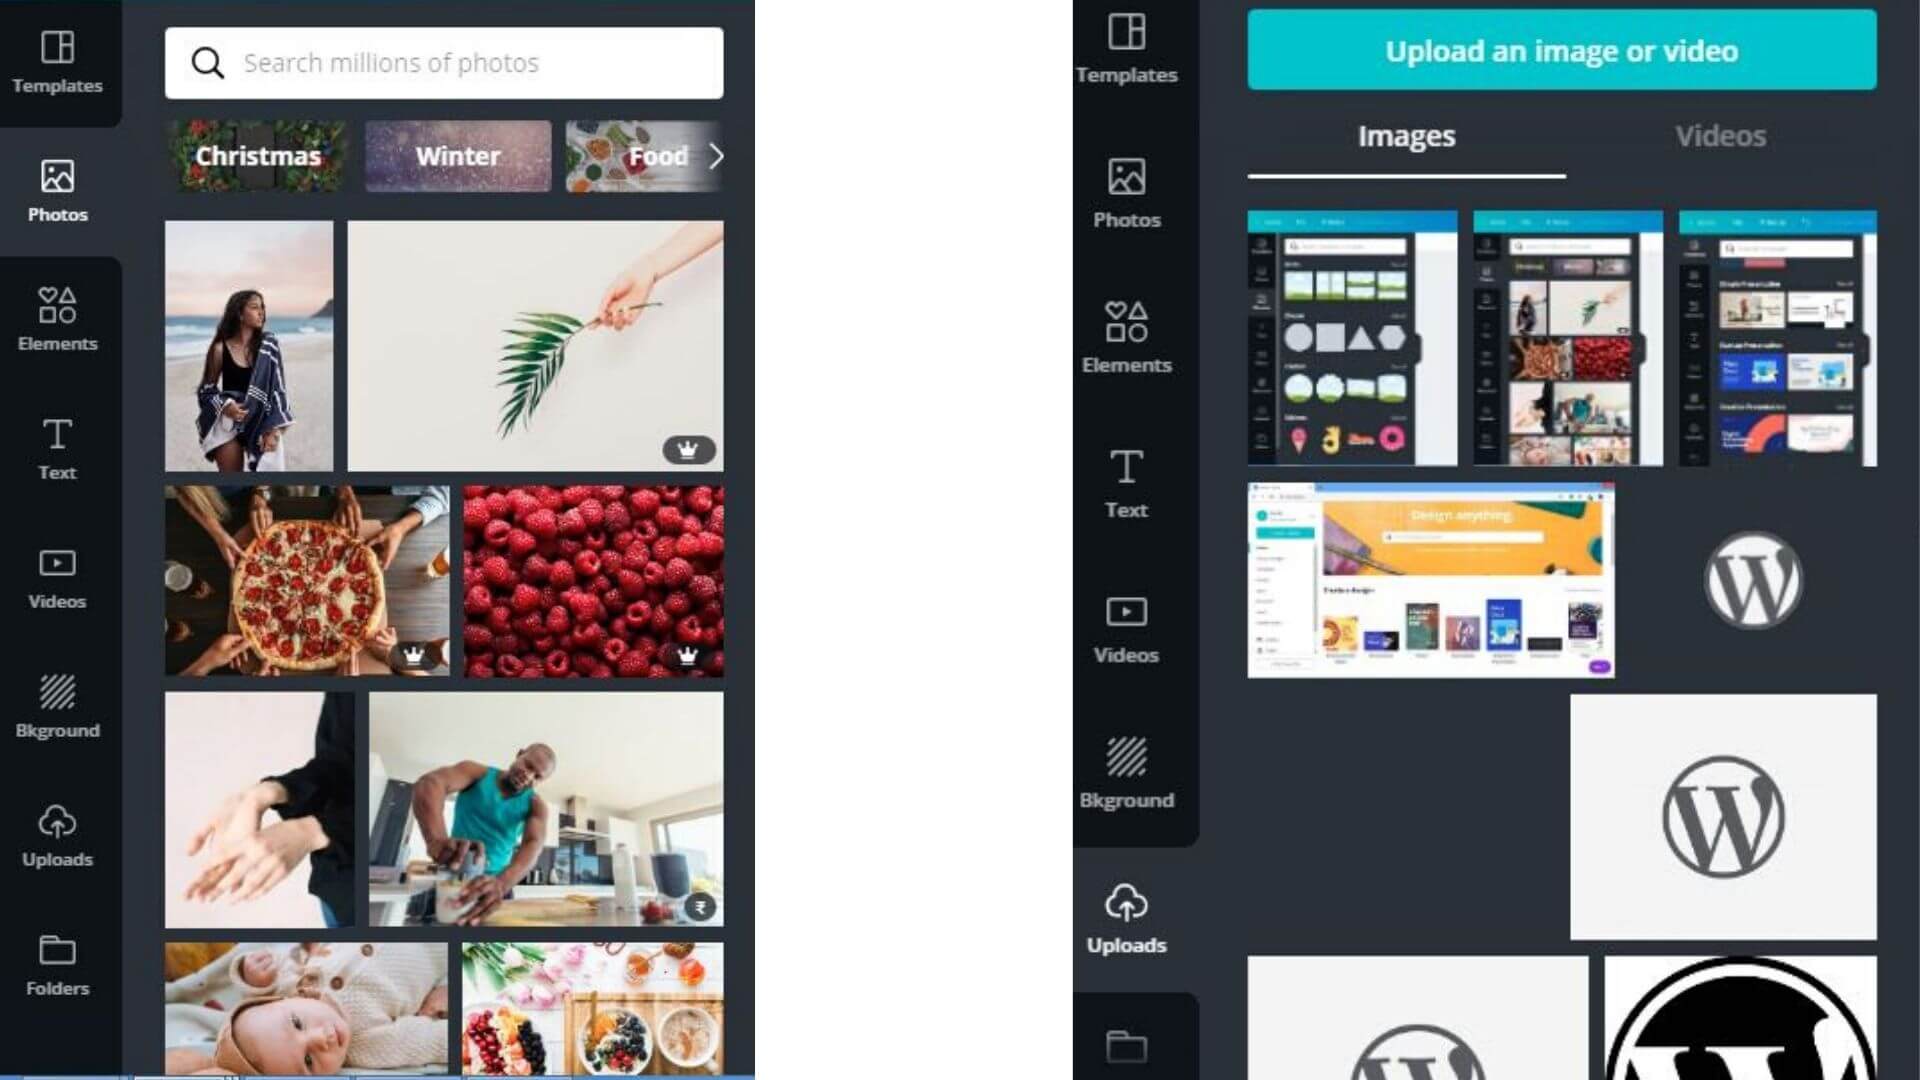 How to add photos in Canva